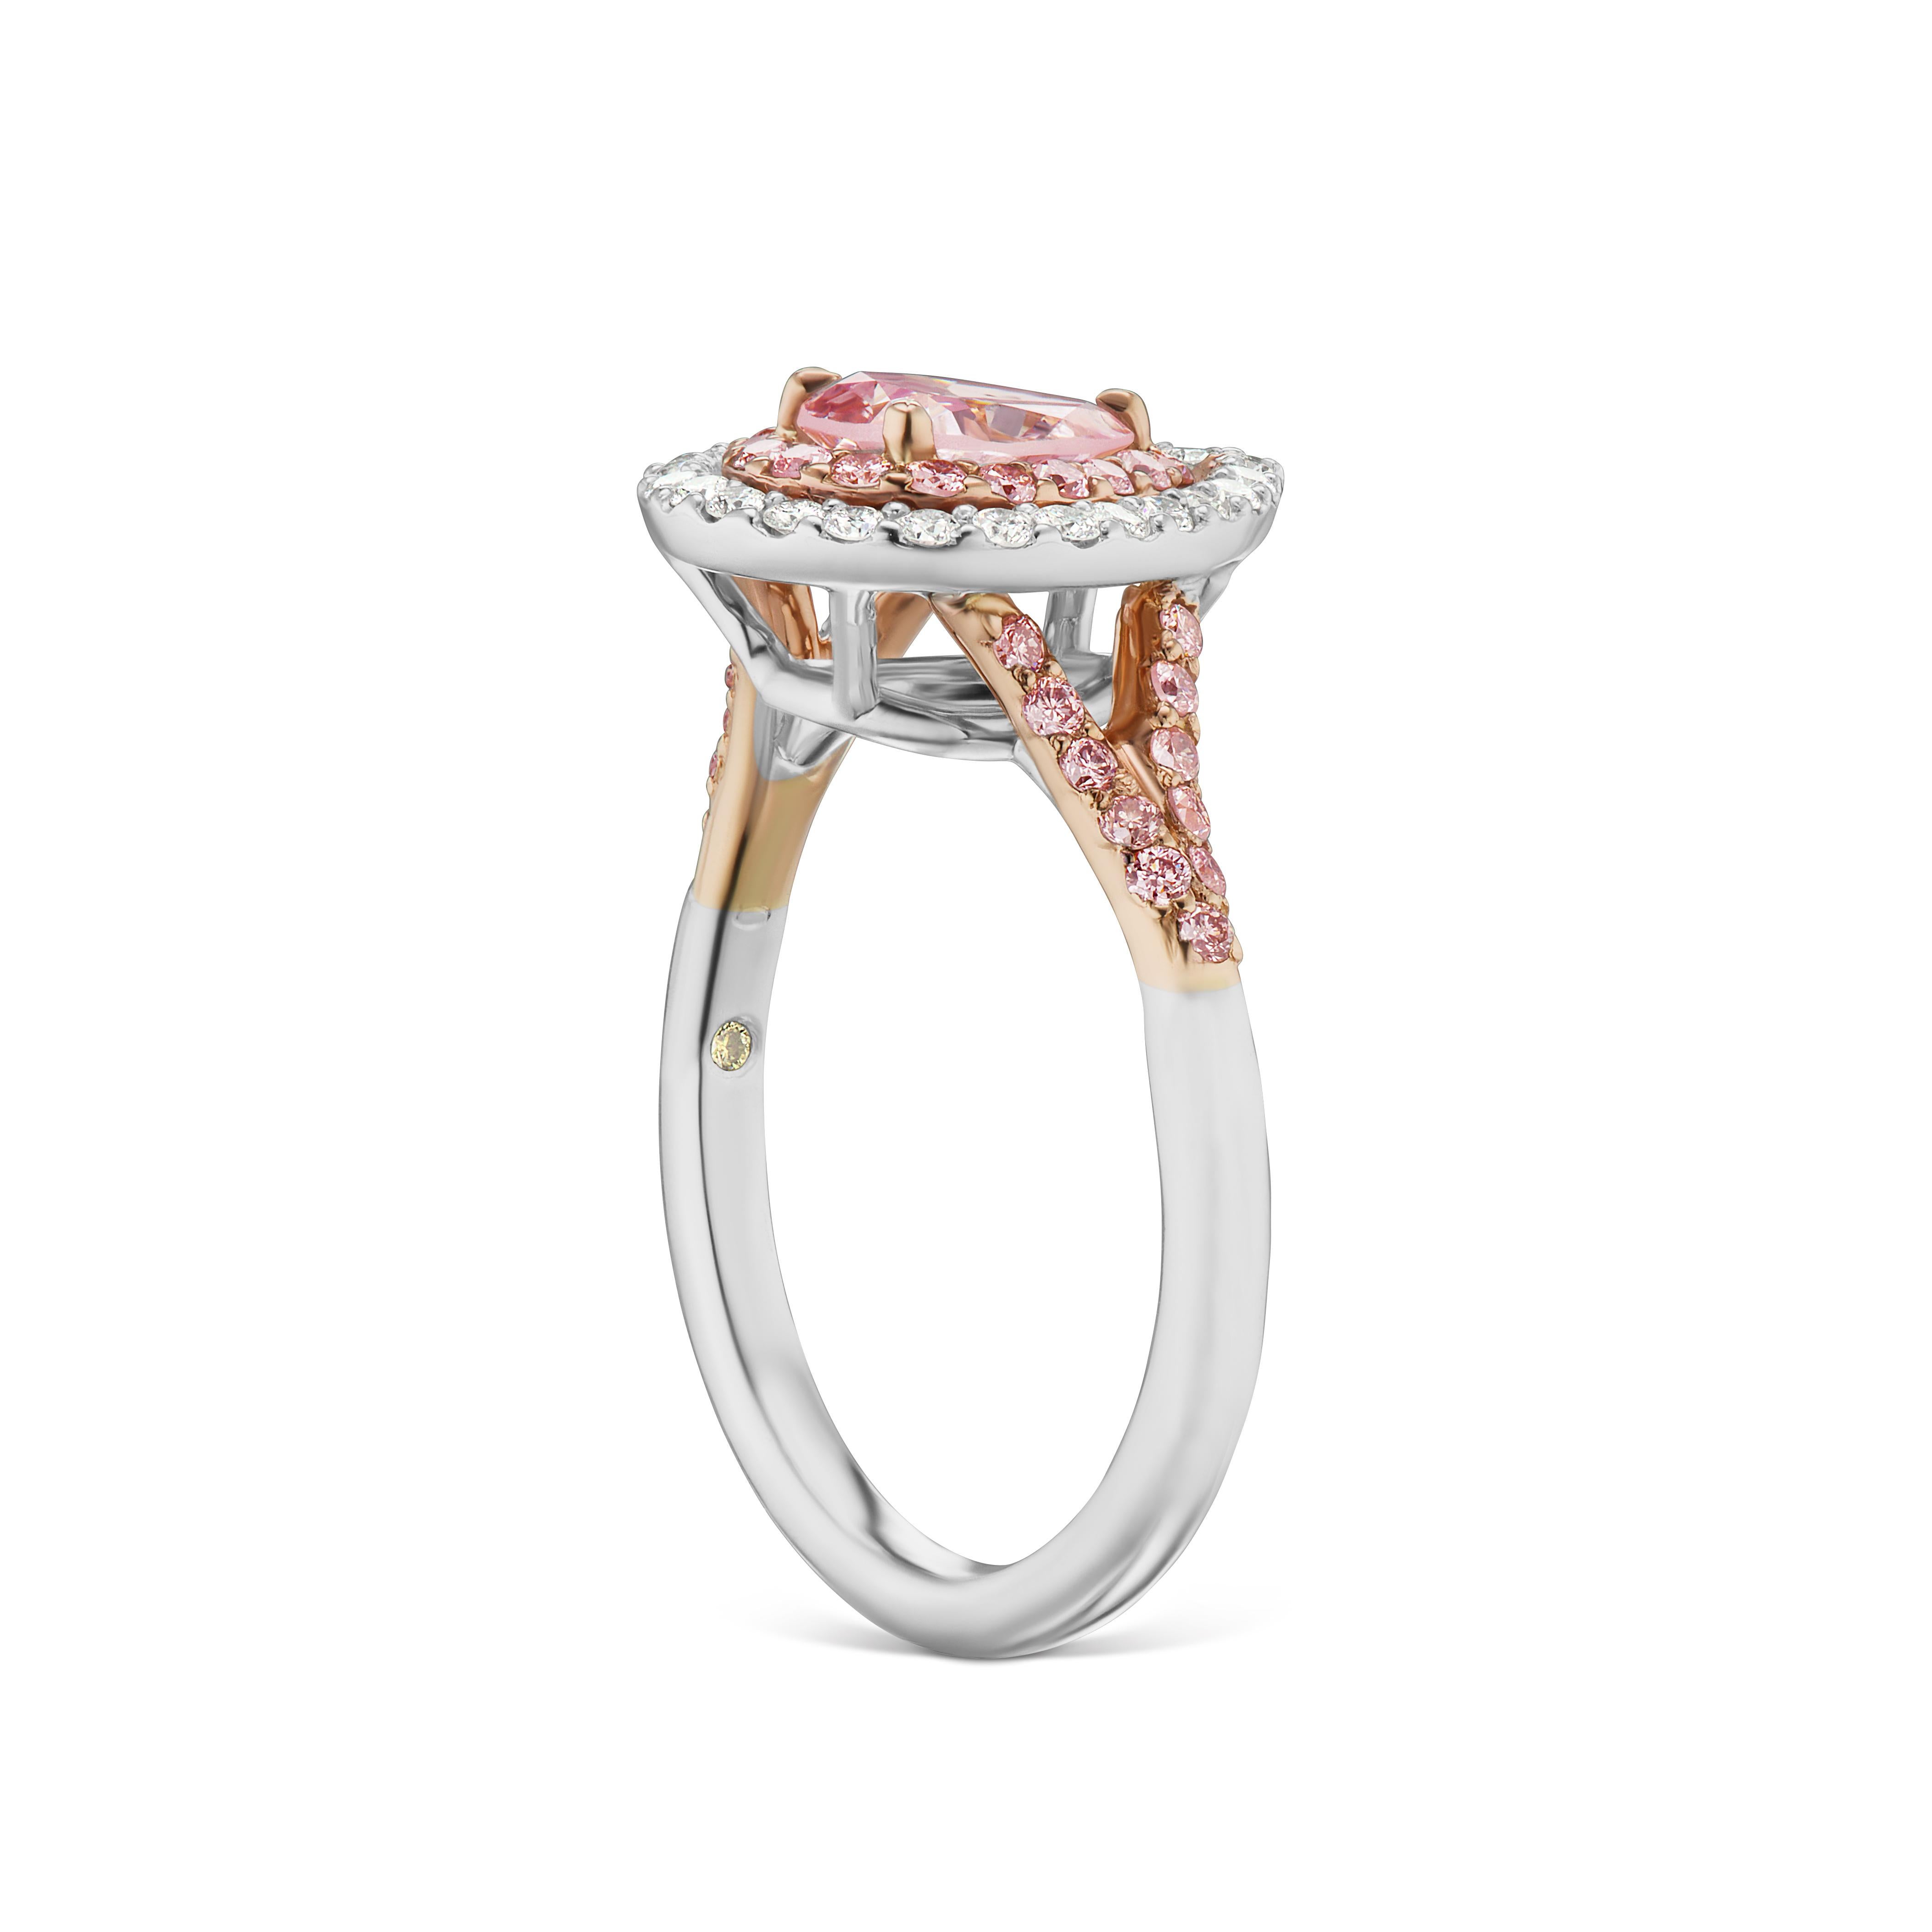 This Fancy Intense Purple-Pink .81 ct Pear Shaped Diamond in Platinum and 18kt Rose gold steals the show! It's set with and additional halo of  .39 ct total weight of fancy intense Pink melee, along with another .24 ct total weight of white EVS